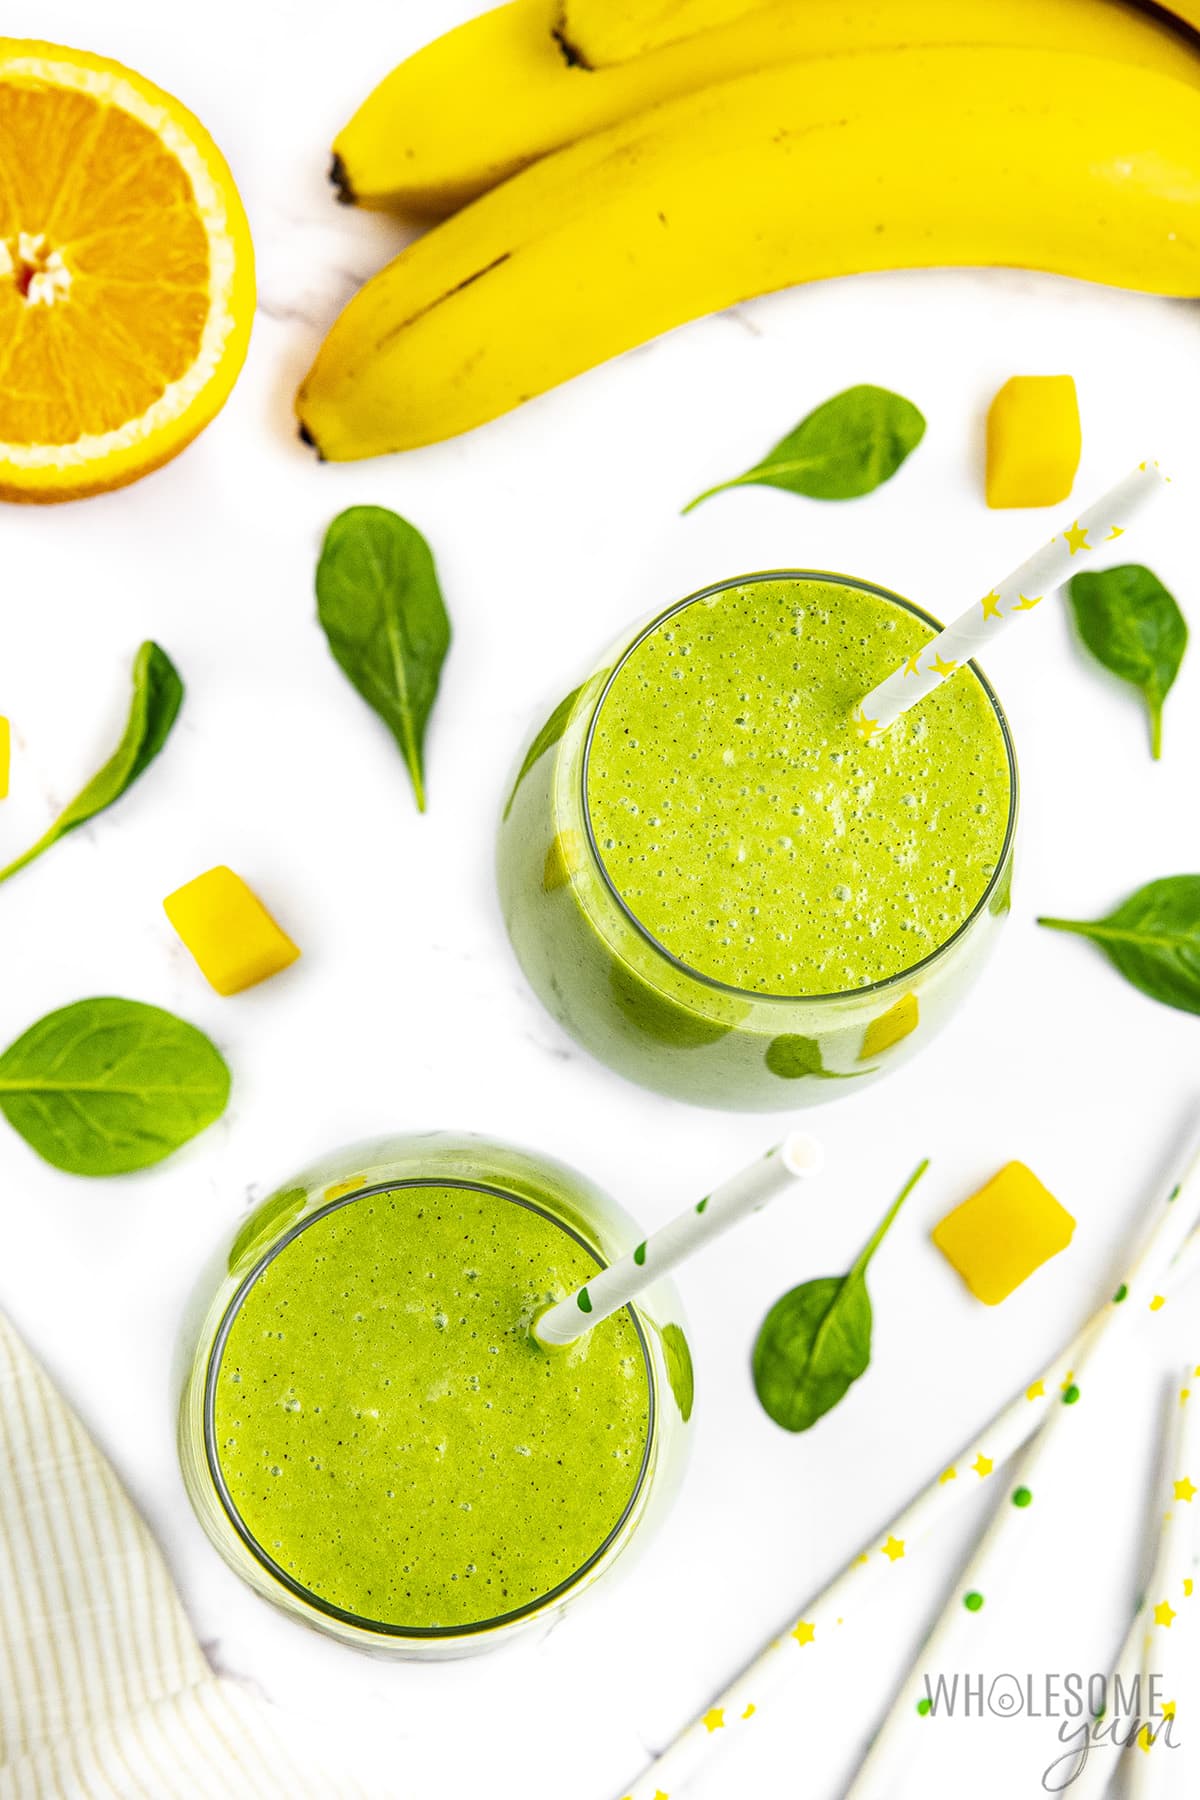 Two spinach smoothies with bananas and a slice of orange on the side.